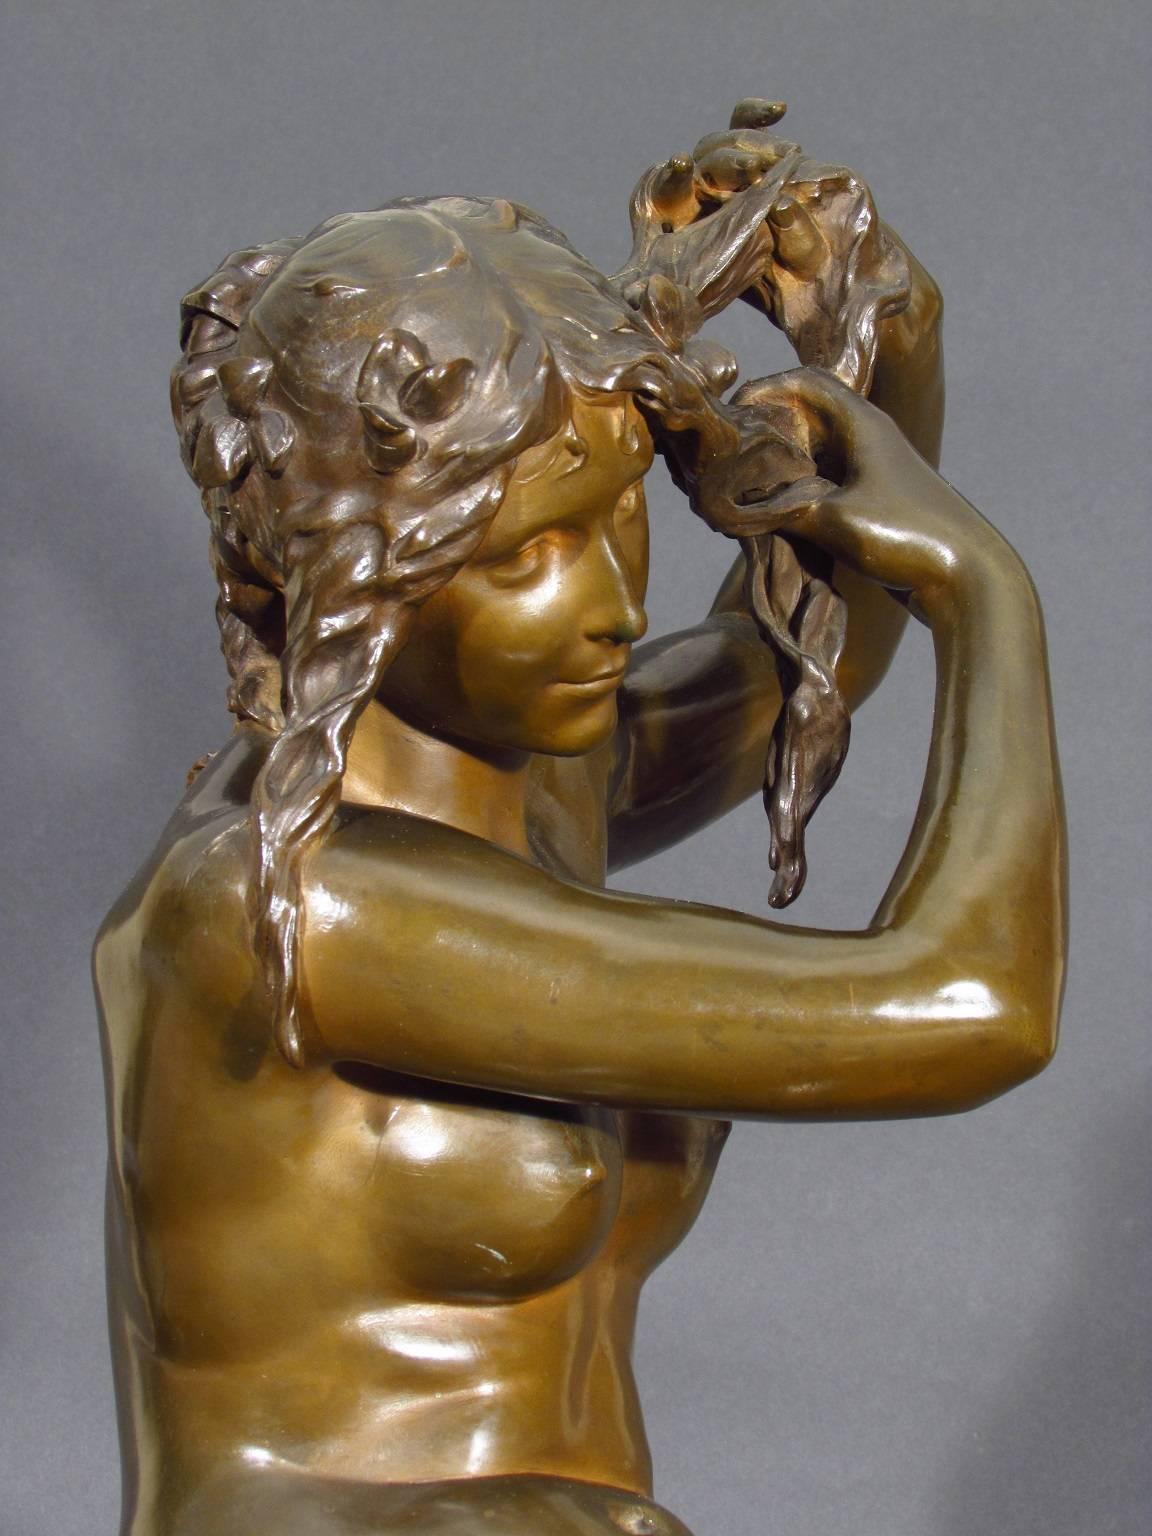 Antique French-School Ninteenth Century nude bronze sculpture by award-winning sculptor Hector Lemaire (1846-1933).

 Superbly detailed cast bronze of an allegorical representation titled Le Matin of a seated young maiden arranging her hair. One